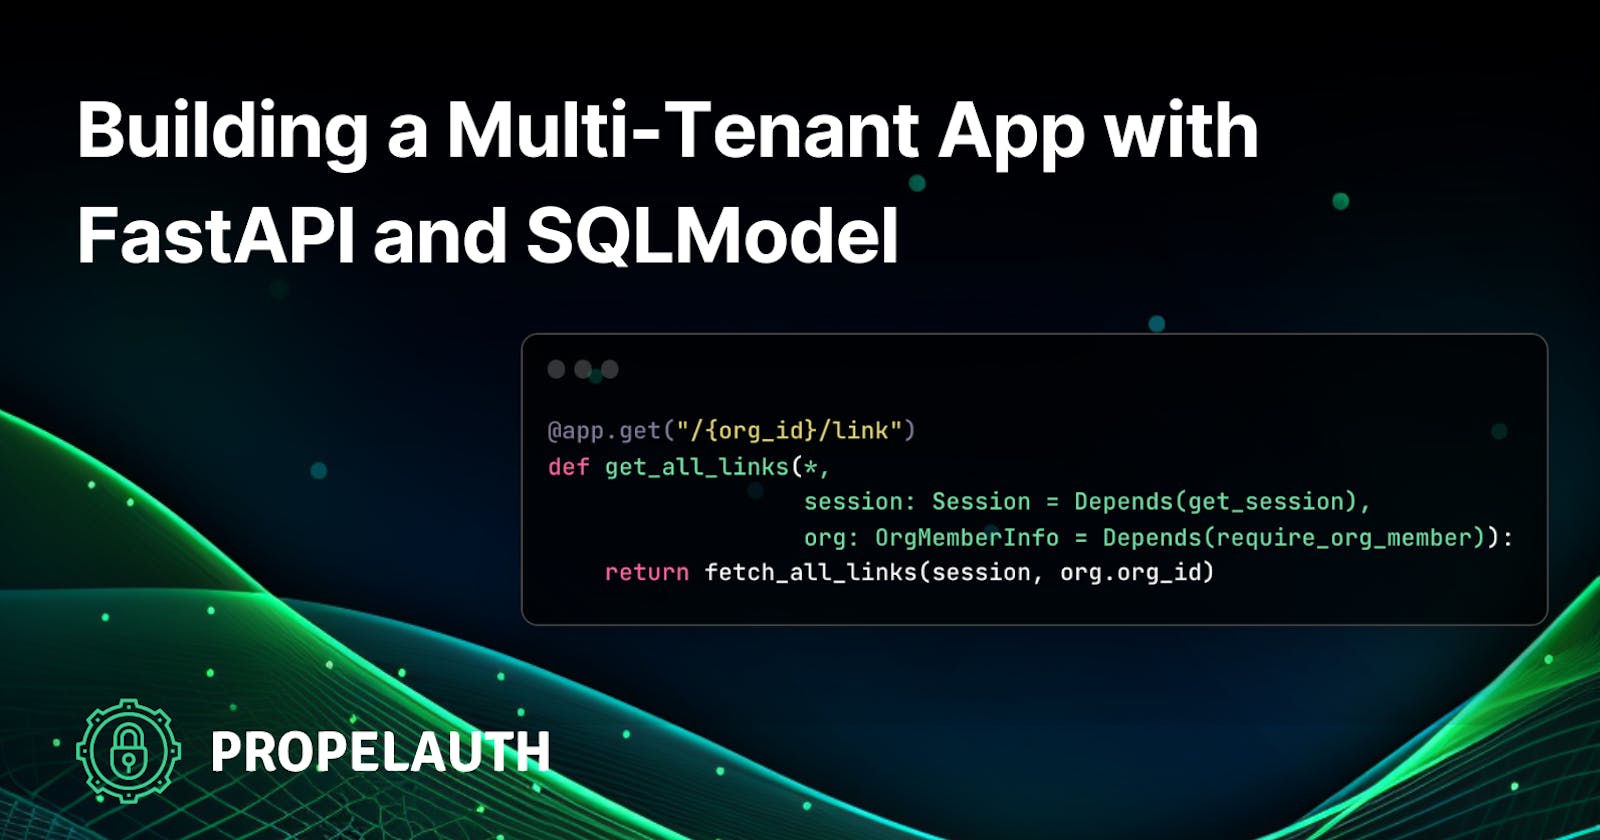 Building a Multi-Tenant App with FastAPI, SQLModel, and PropelAuth